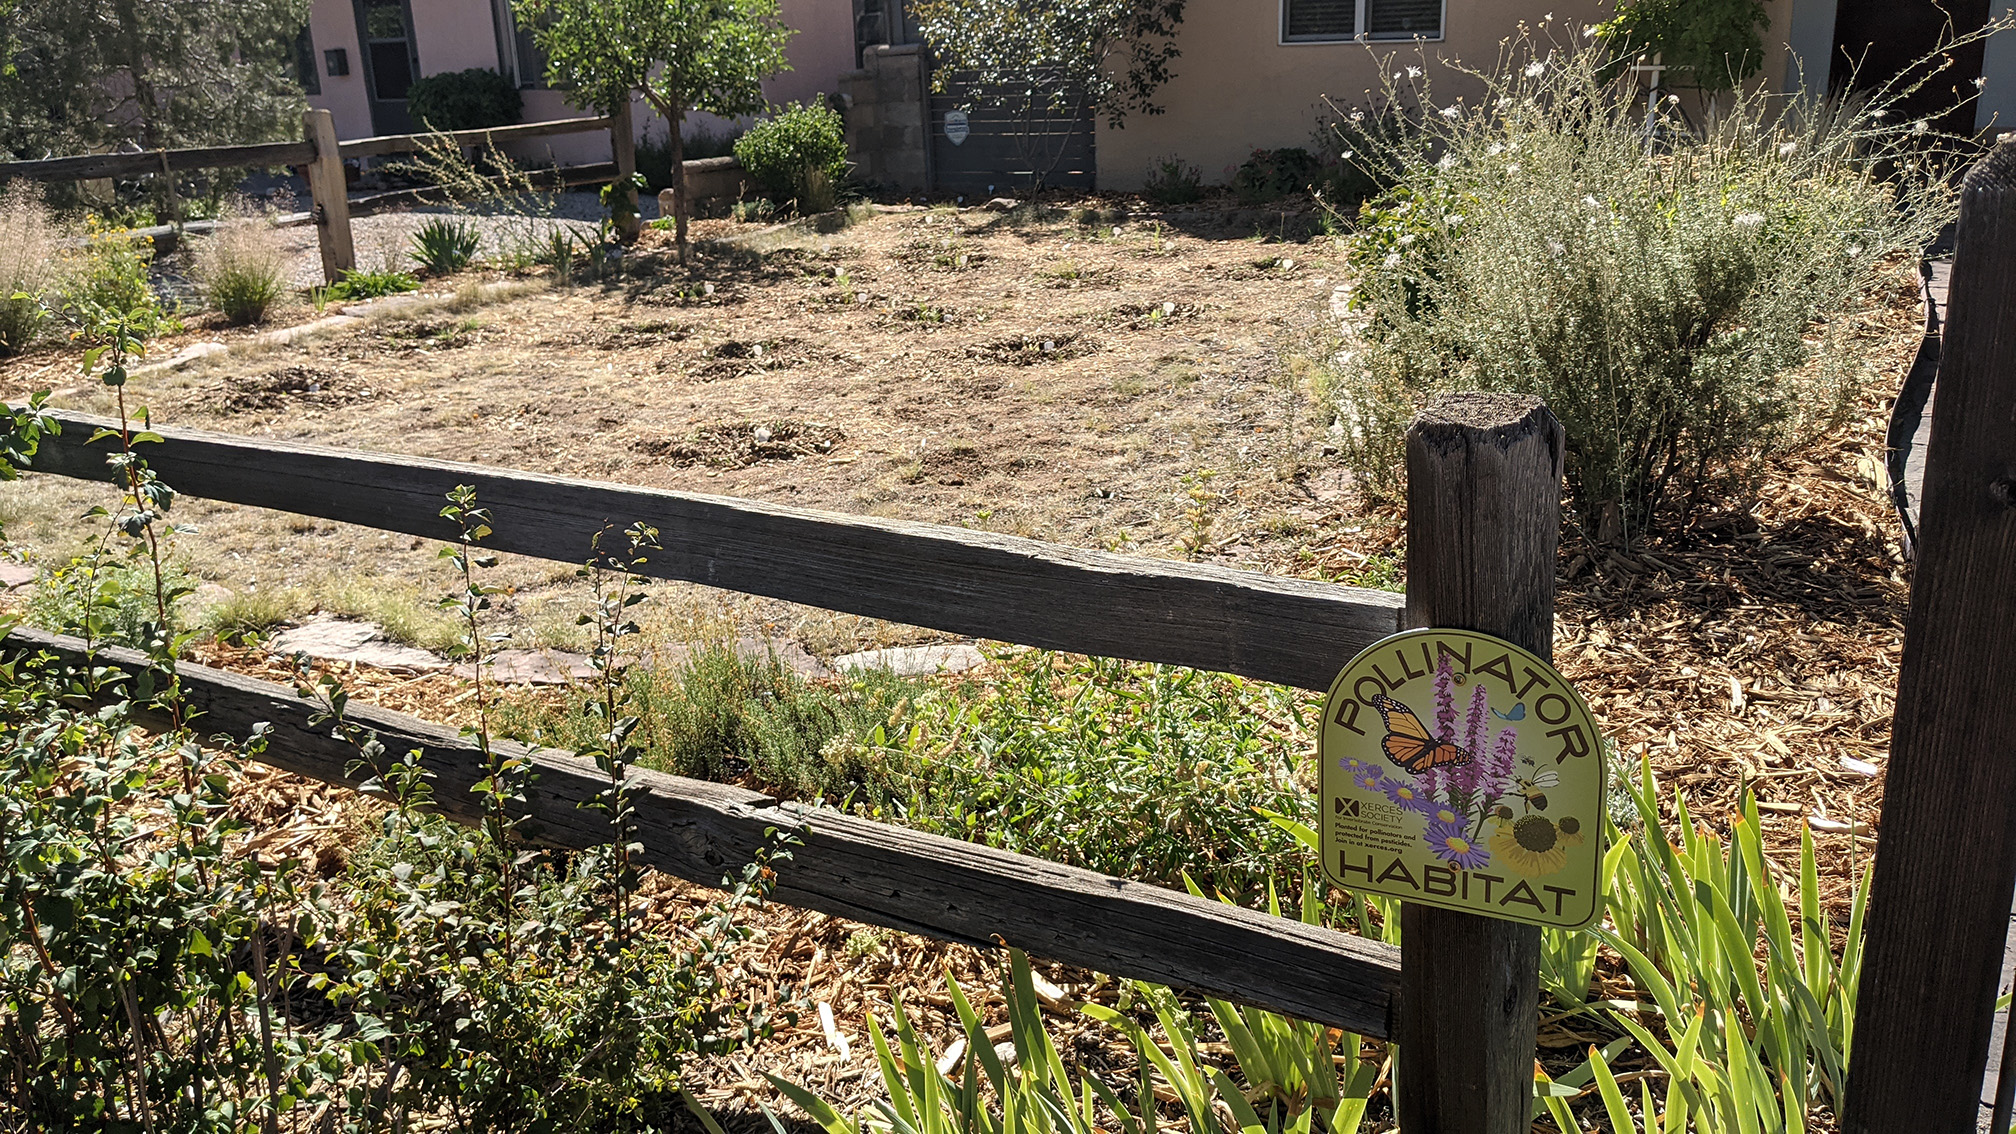 A front garden in which flowers have been planted. Small circles of recently dug soil surround each small, green plant. The garden is edged by a wooden fence made of two horizontal rails and widely spaced posts. In the foreground, attached to the fence is a sign. The sign is green, with colorful flowers and an orange butterfly and brown lettering that says “pollinator habitat”.